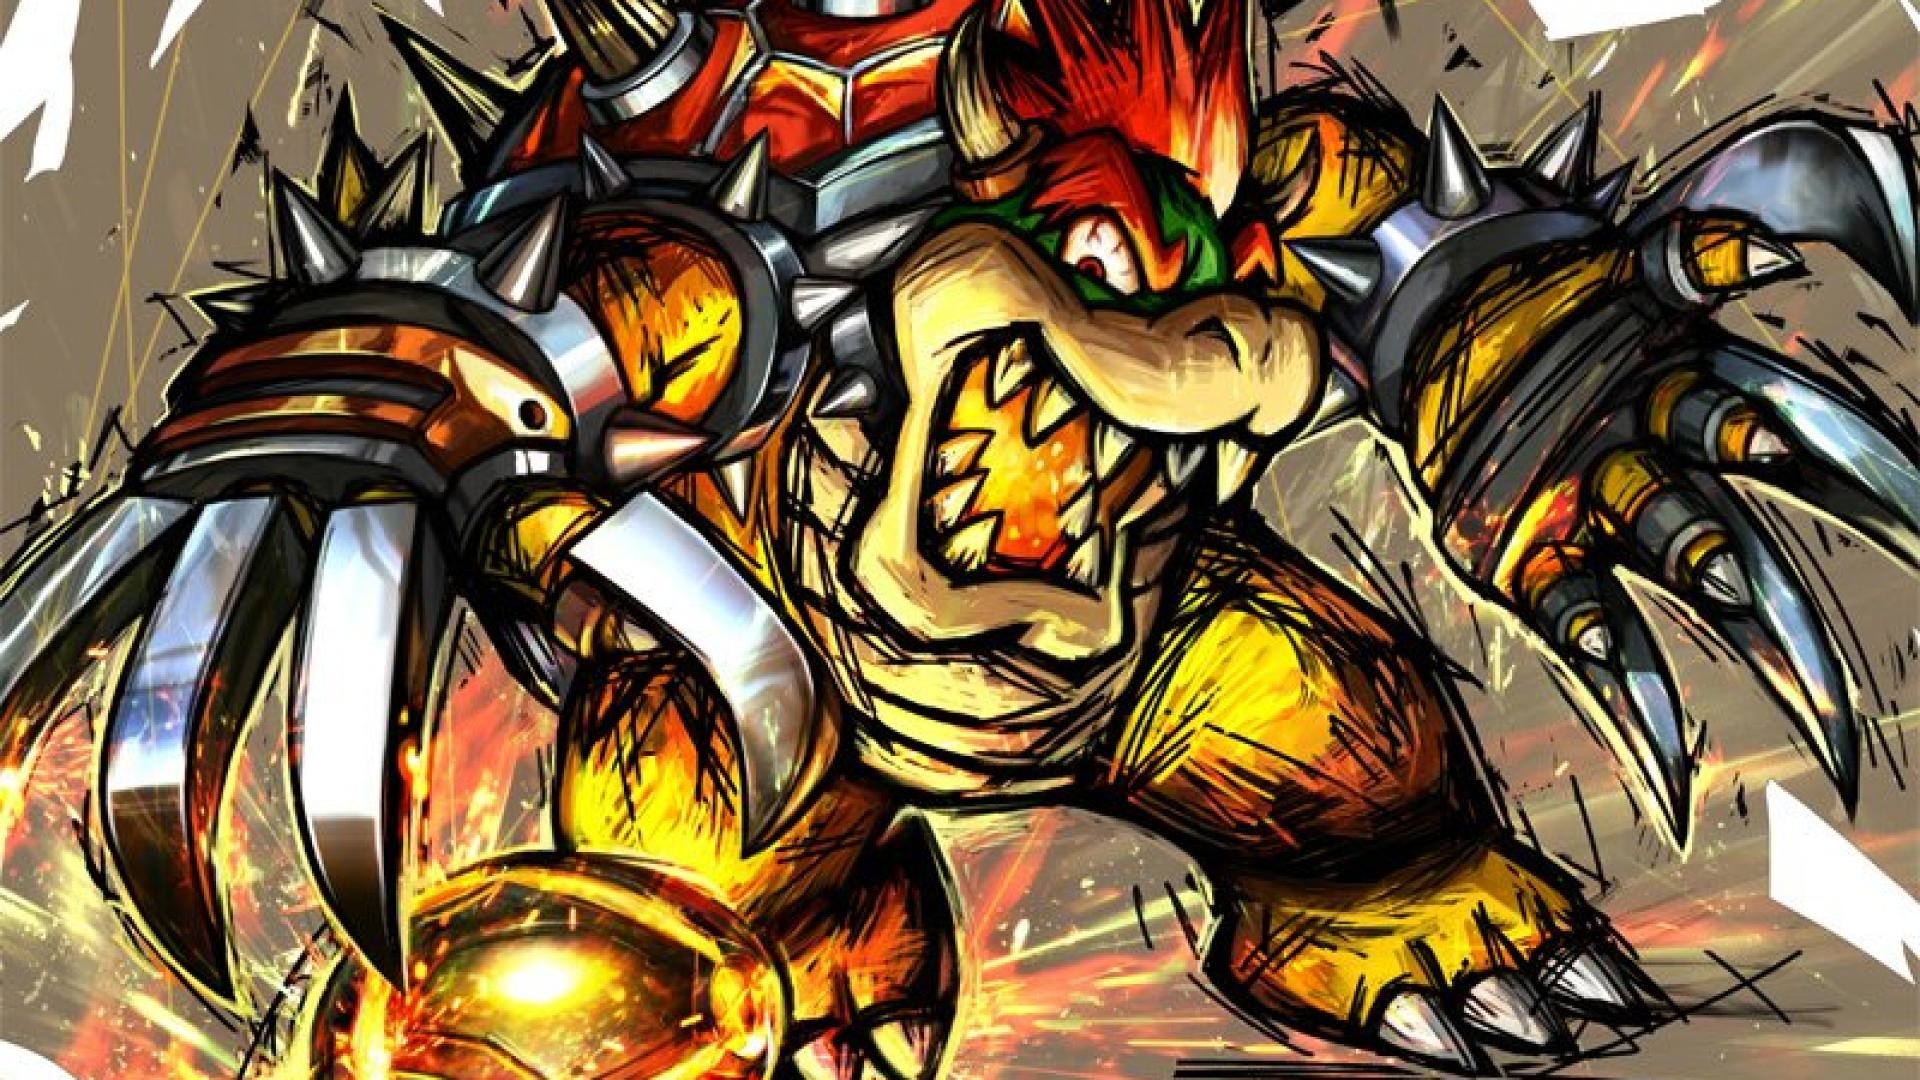 1920x1080 ... bowser king koopa wallpaper free download by caolan courage ...